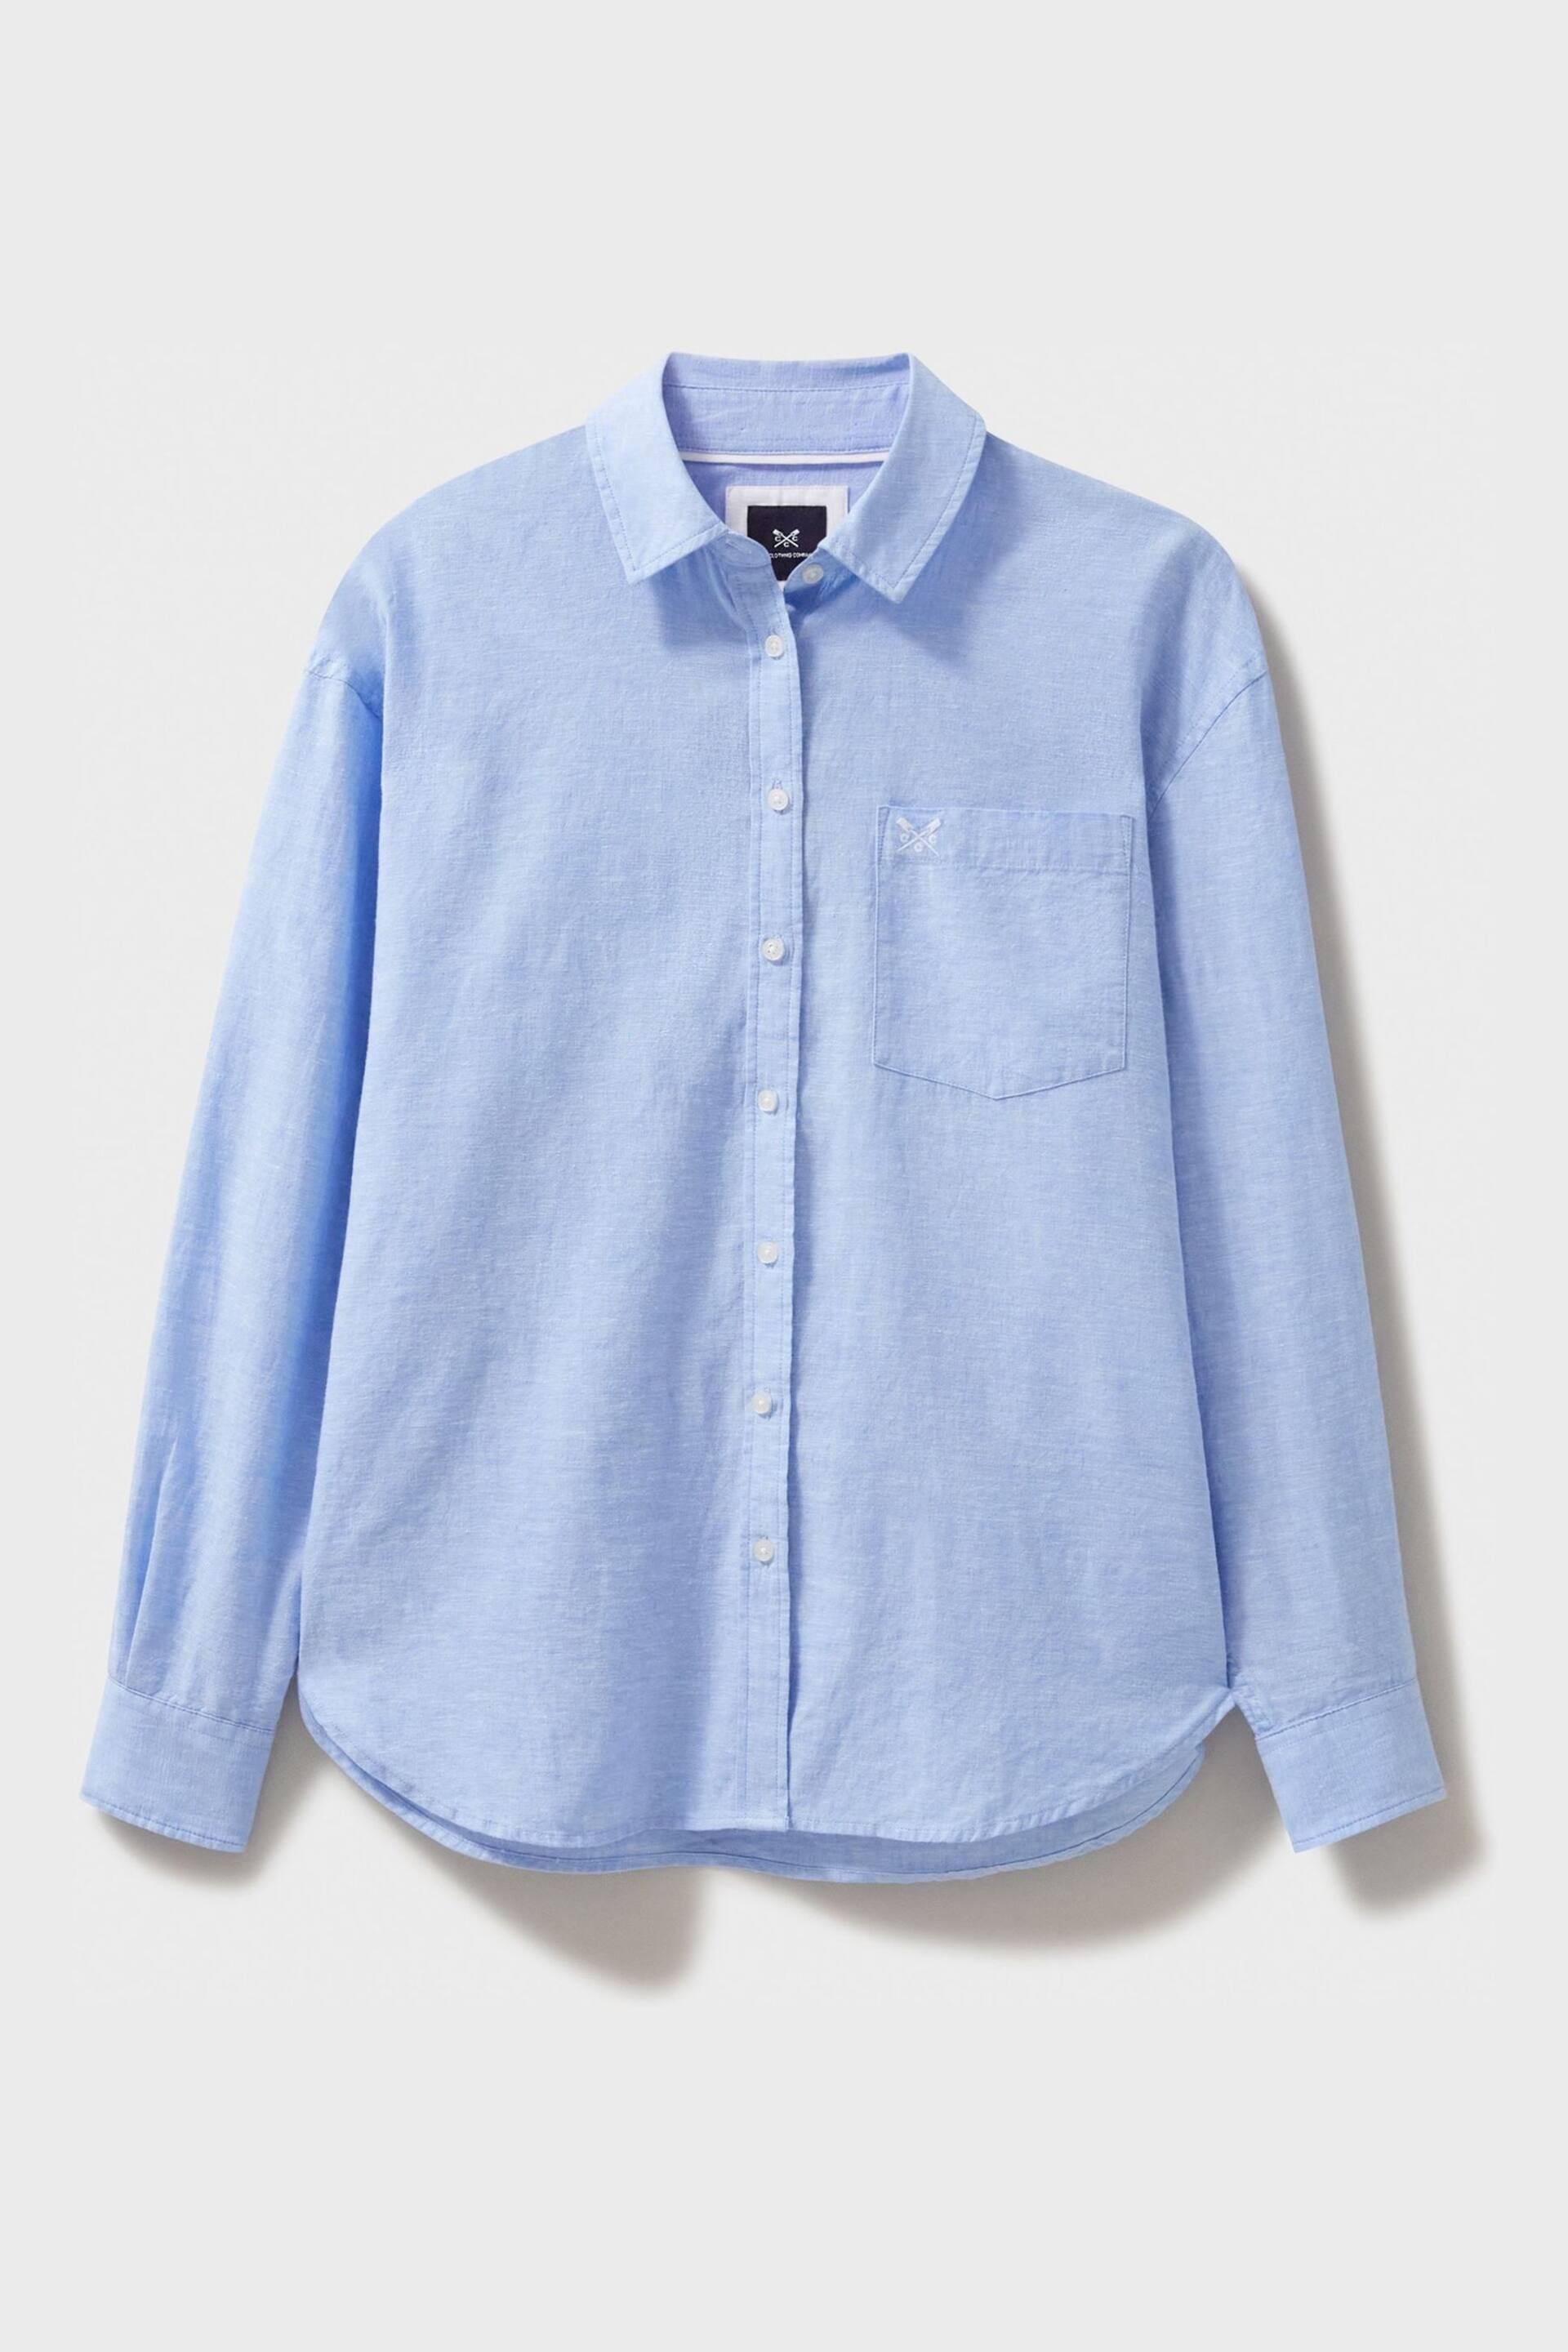 Crew Clothing Company Light Blue Plain Linen Relaxed Shirt - Image 4 of 4